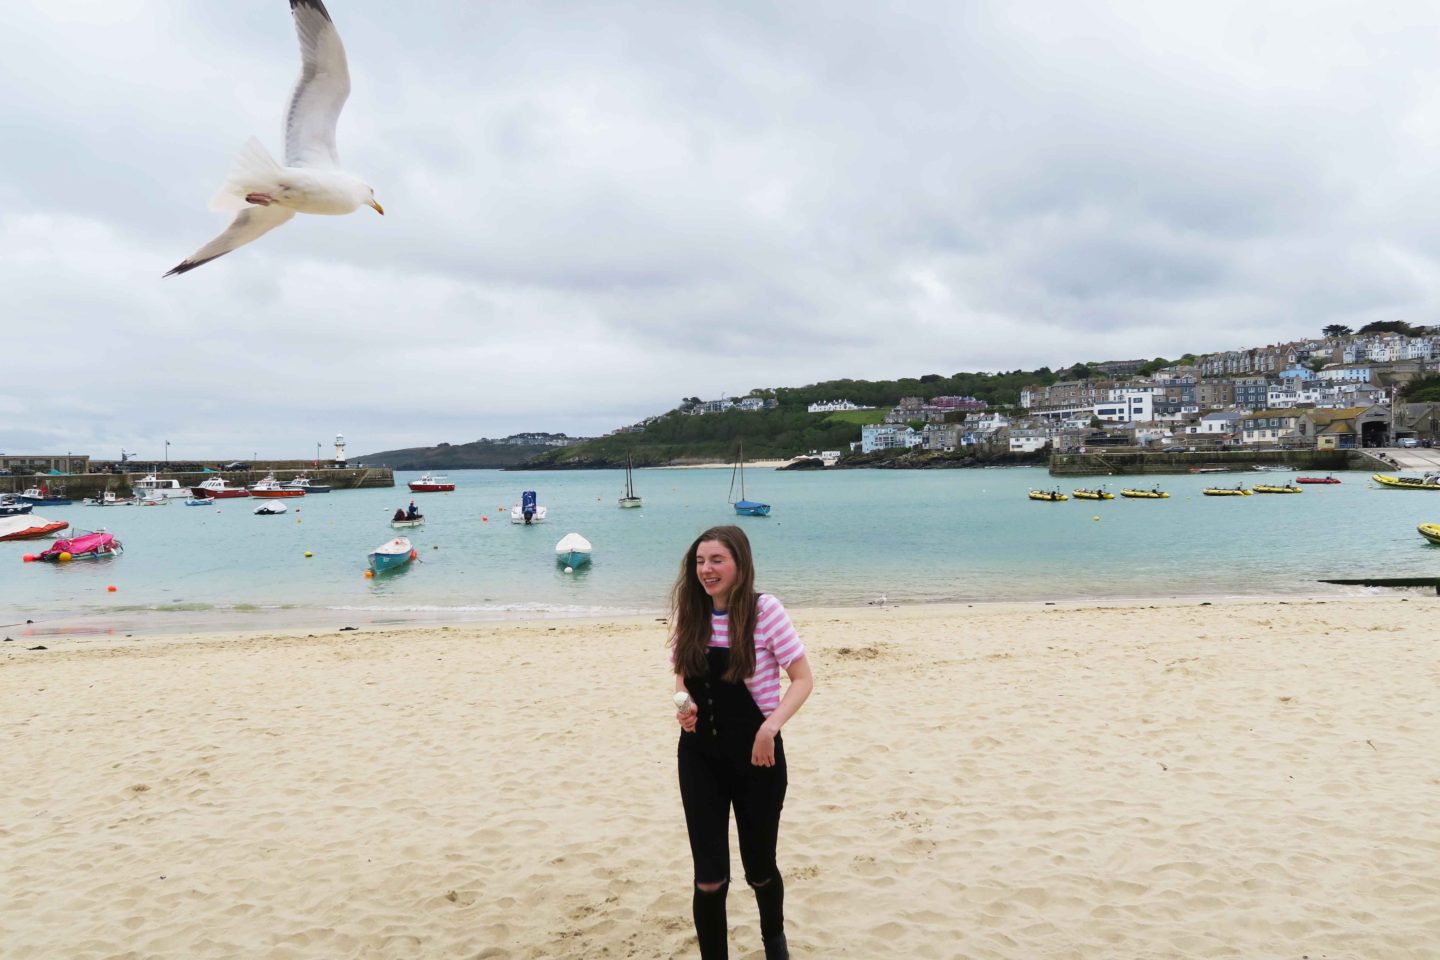 seagull attack on beach in cornwall